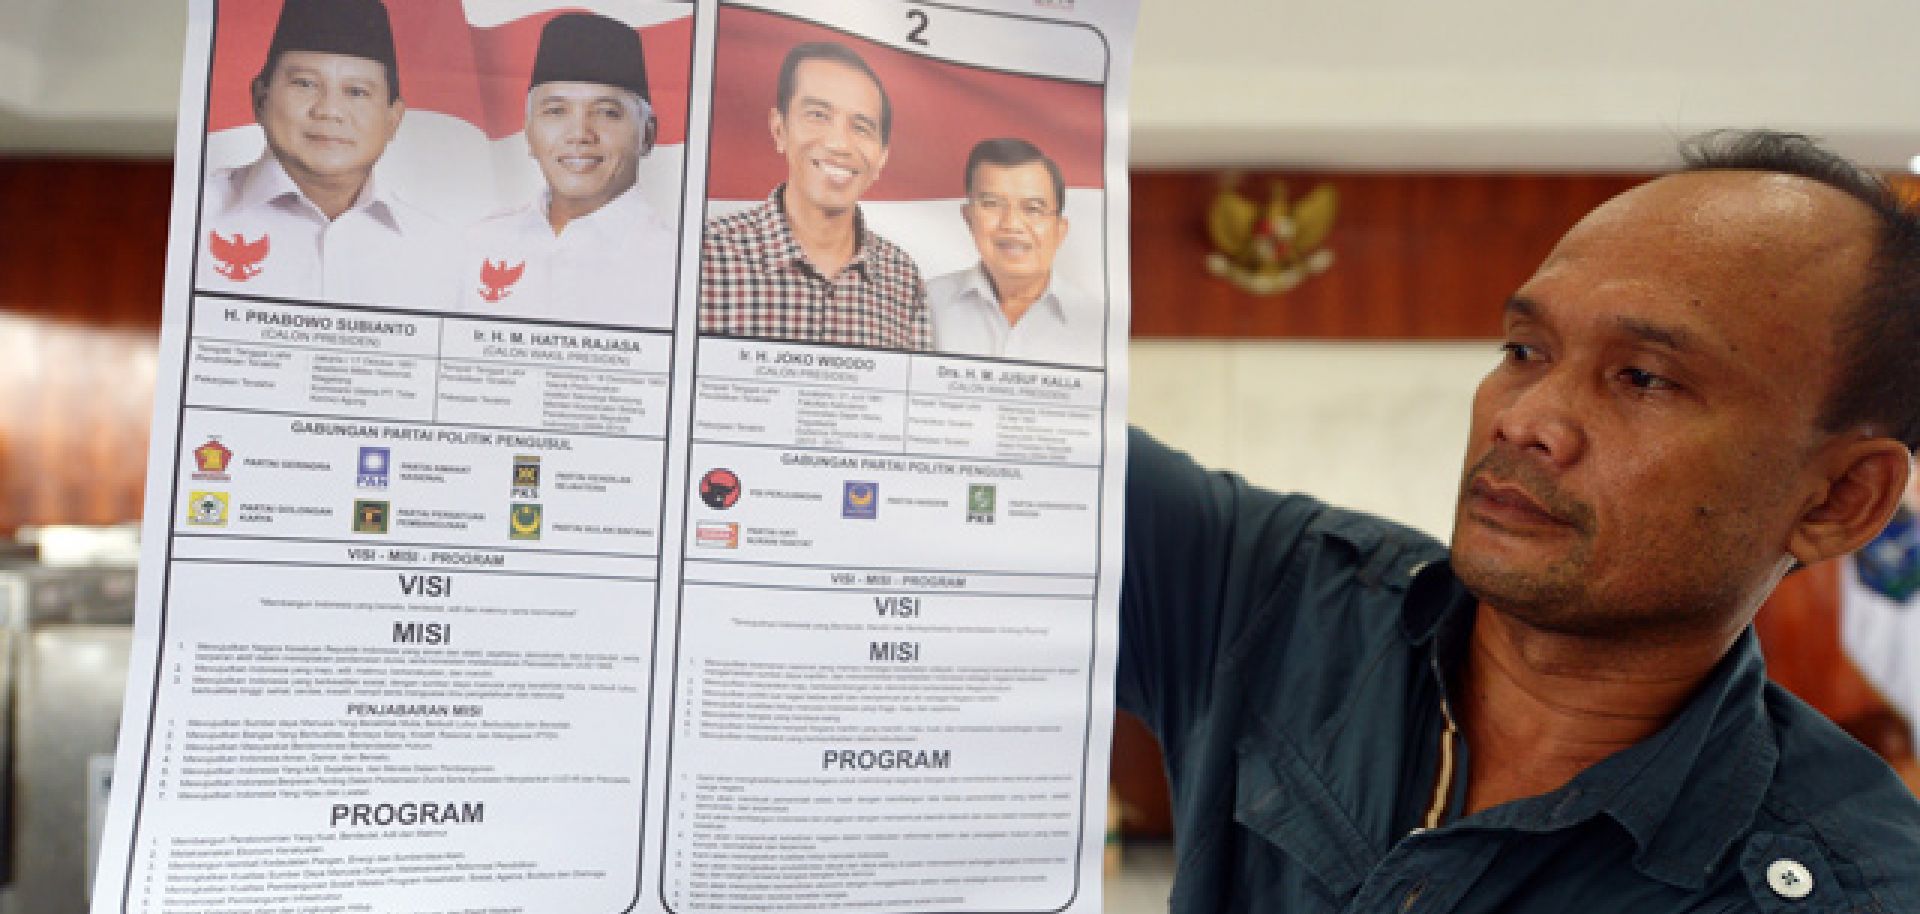 Indonesia's Presidential Election: Different Candidates, Similar Presidents